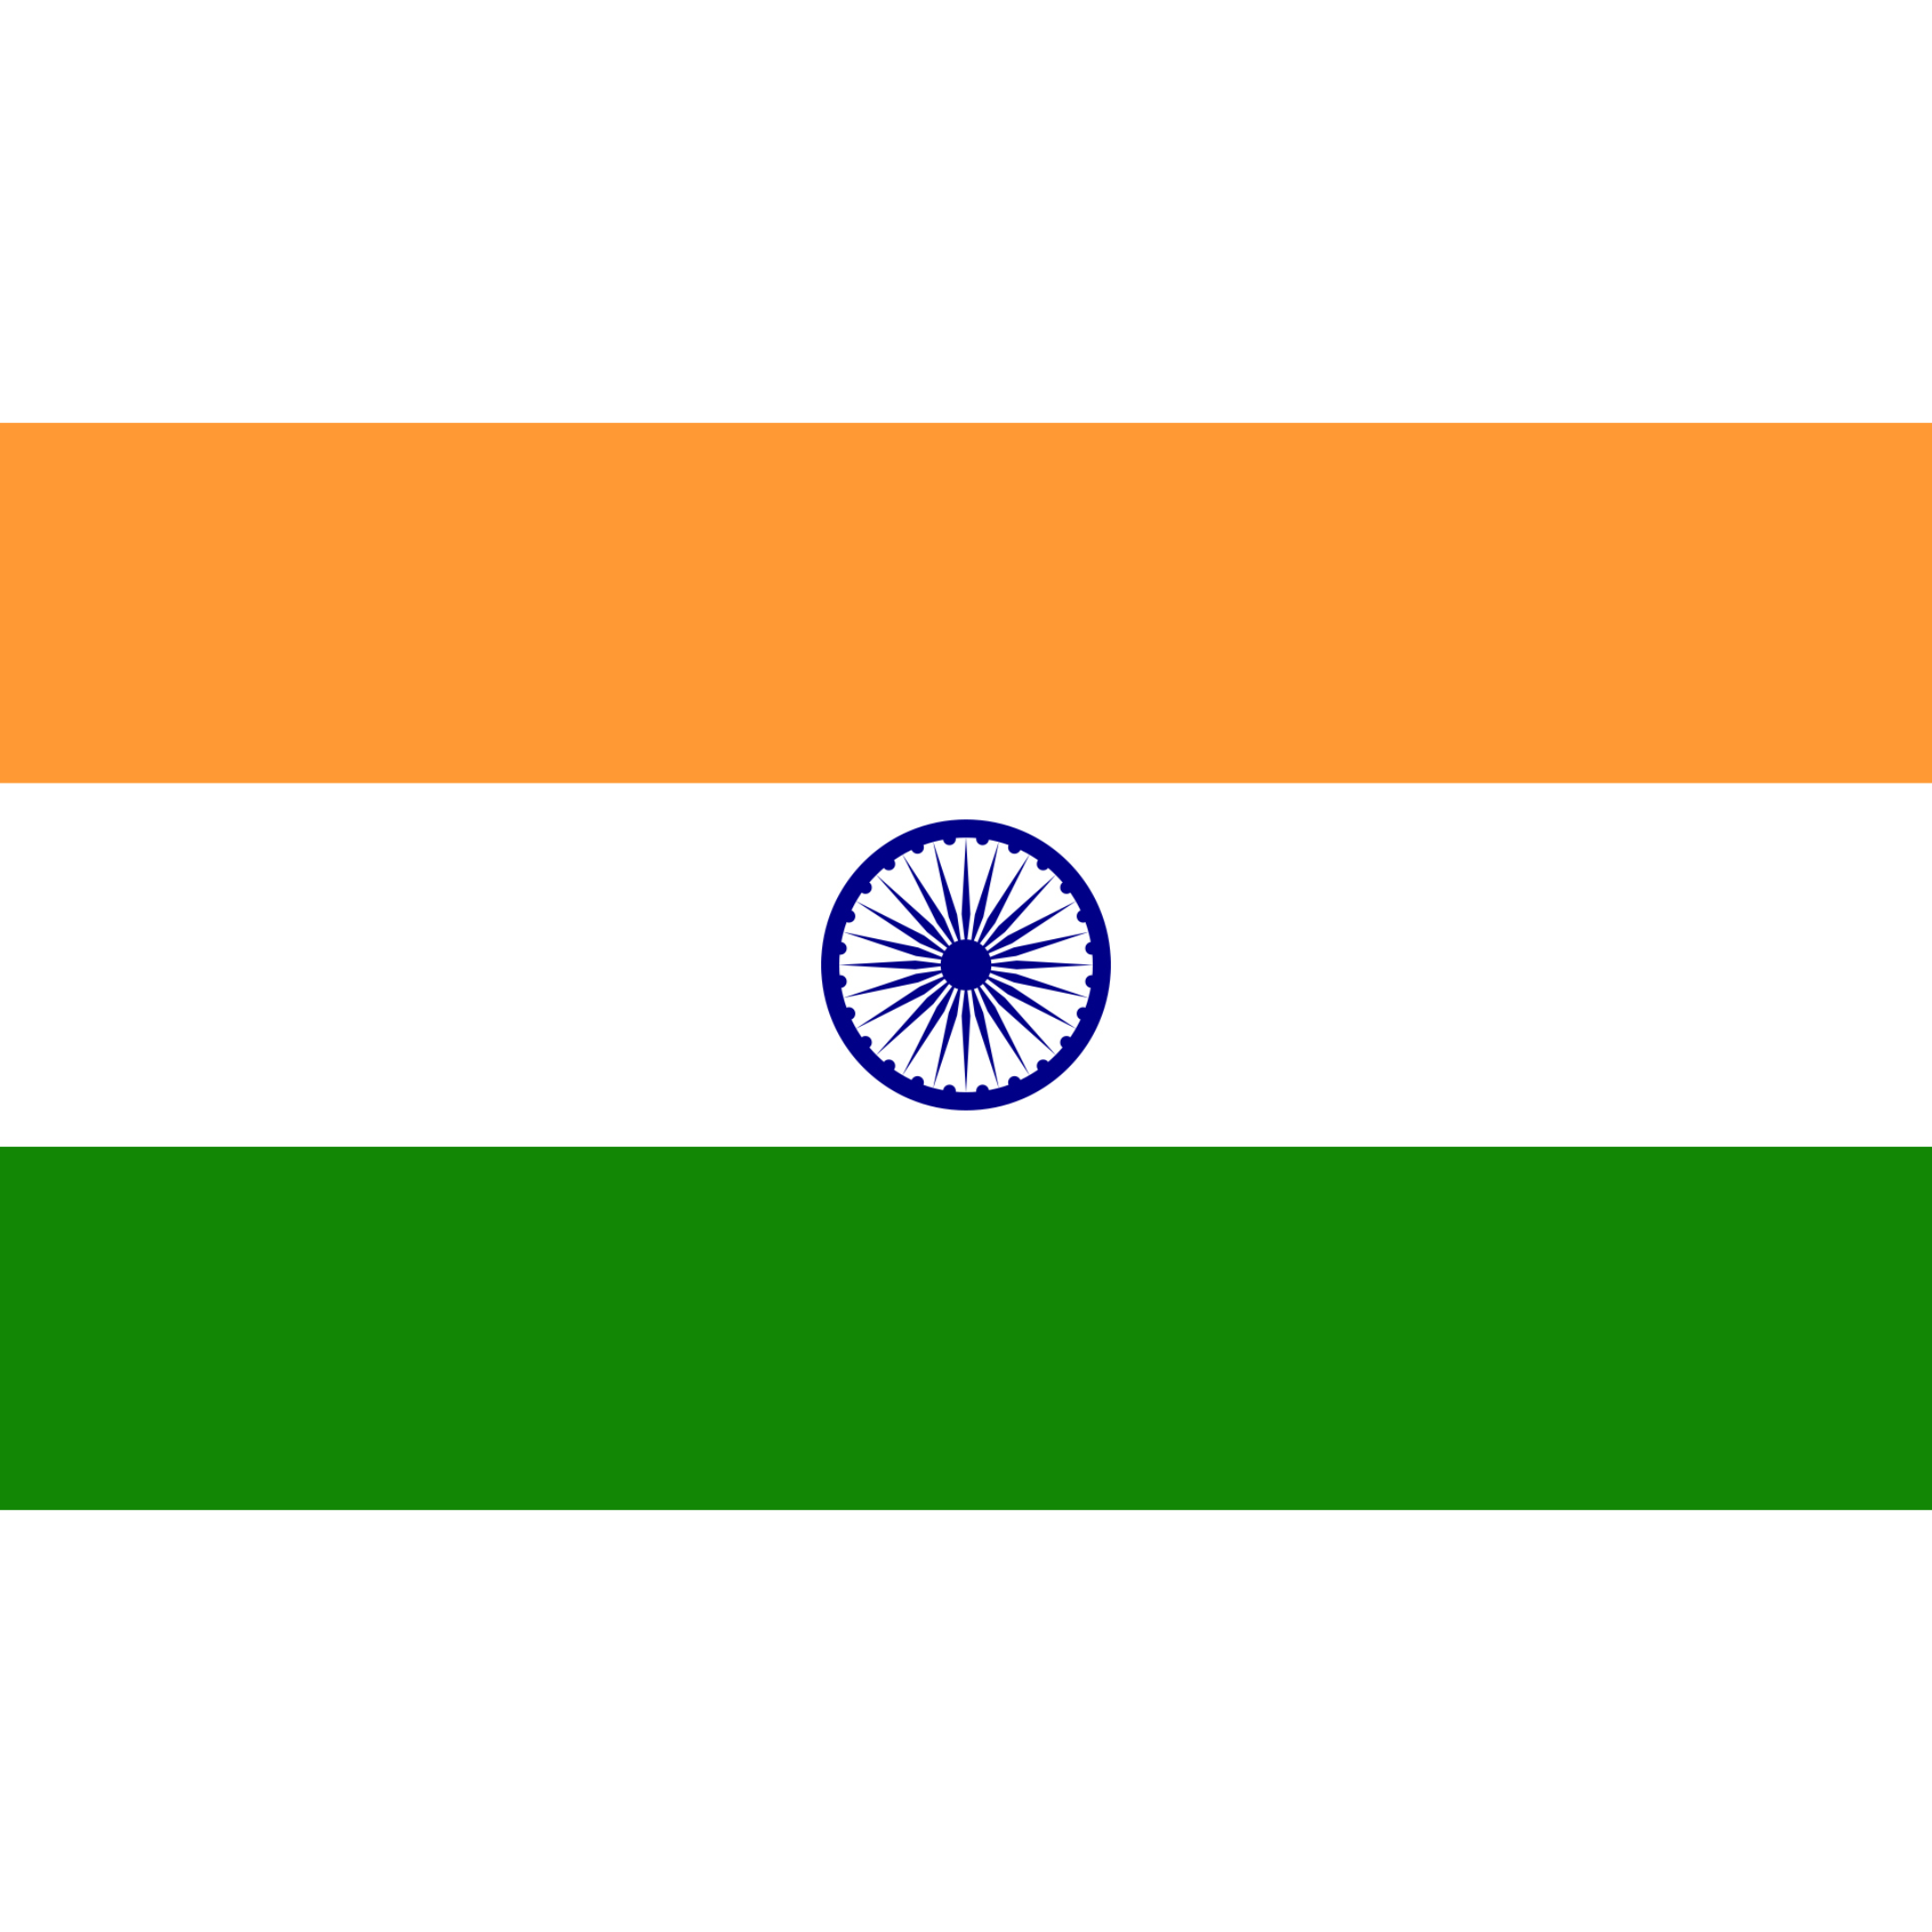 The Indian flag has 3 horizontal bands in orange, white and green, with a wheel (the Ashoka Chakra) in blue at the centre.